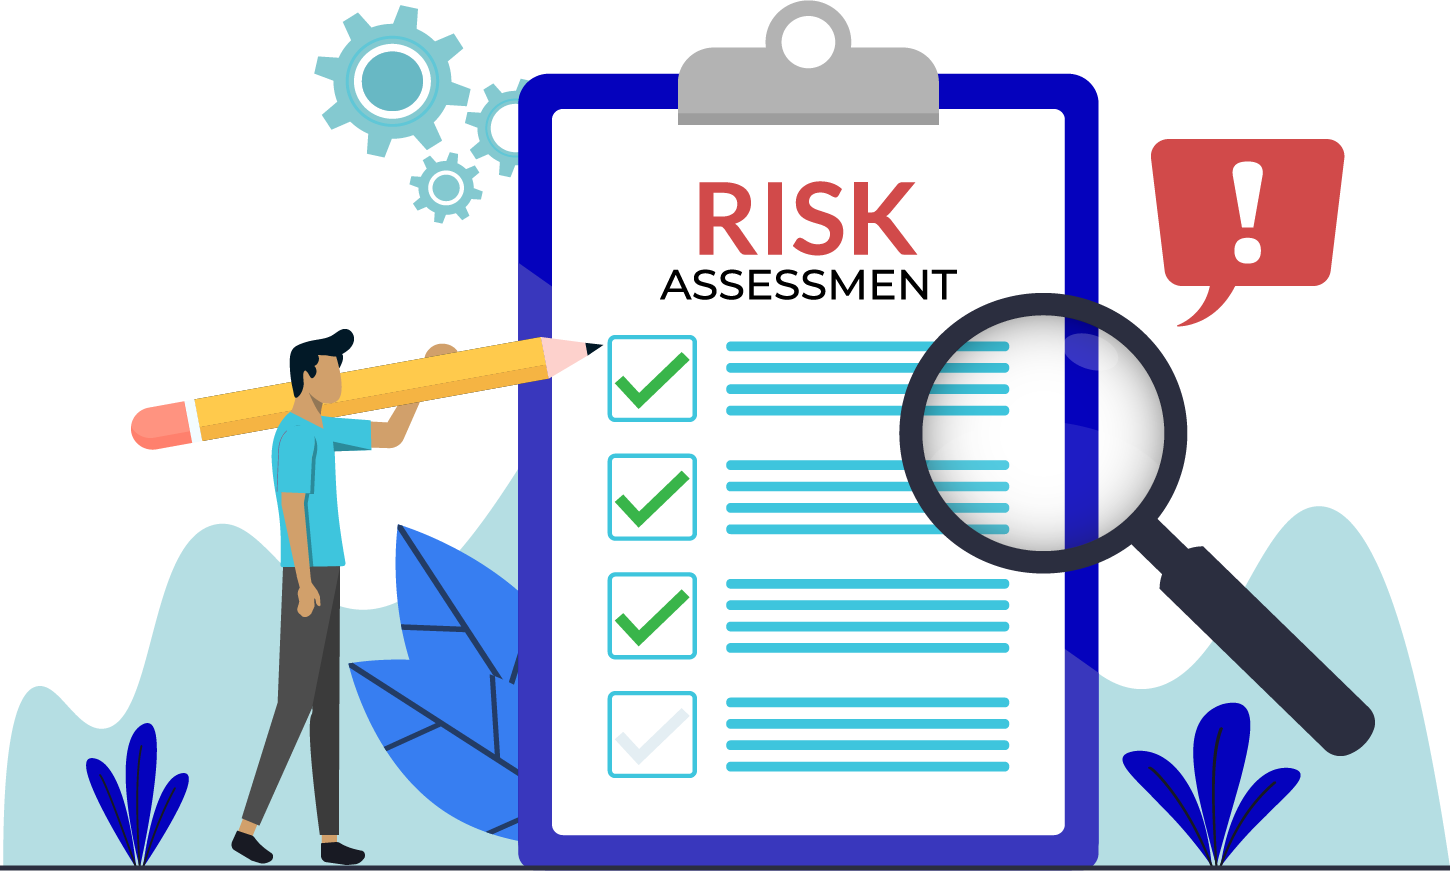 Risk Assessments: what they are, why they're important and how to complete them.